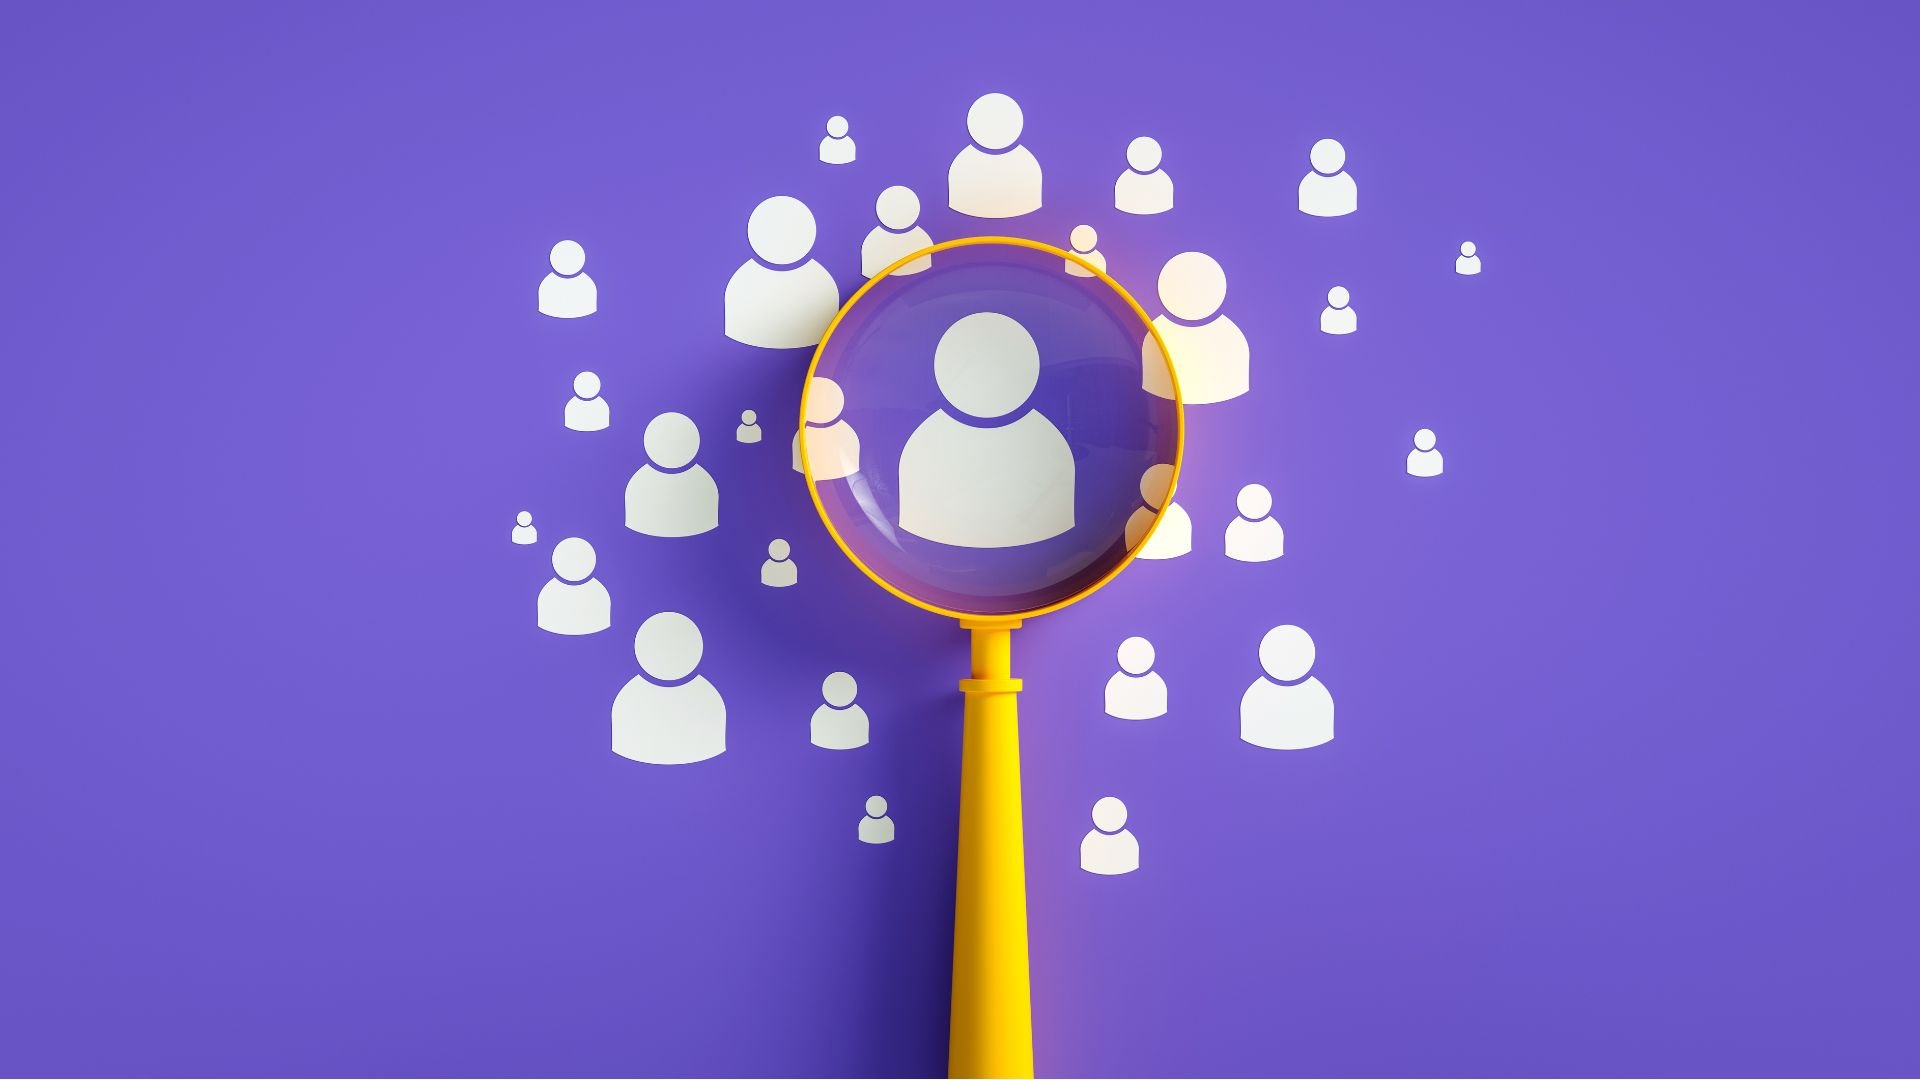 Magnifying glass on people on purple background